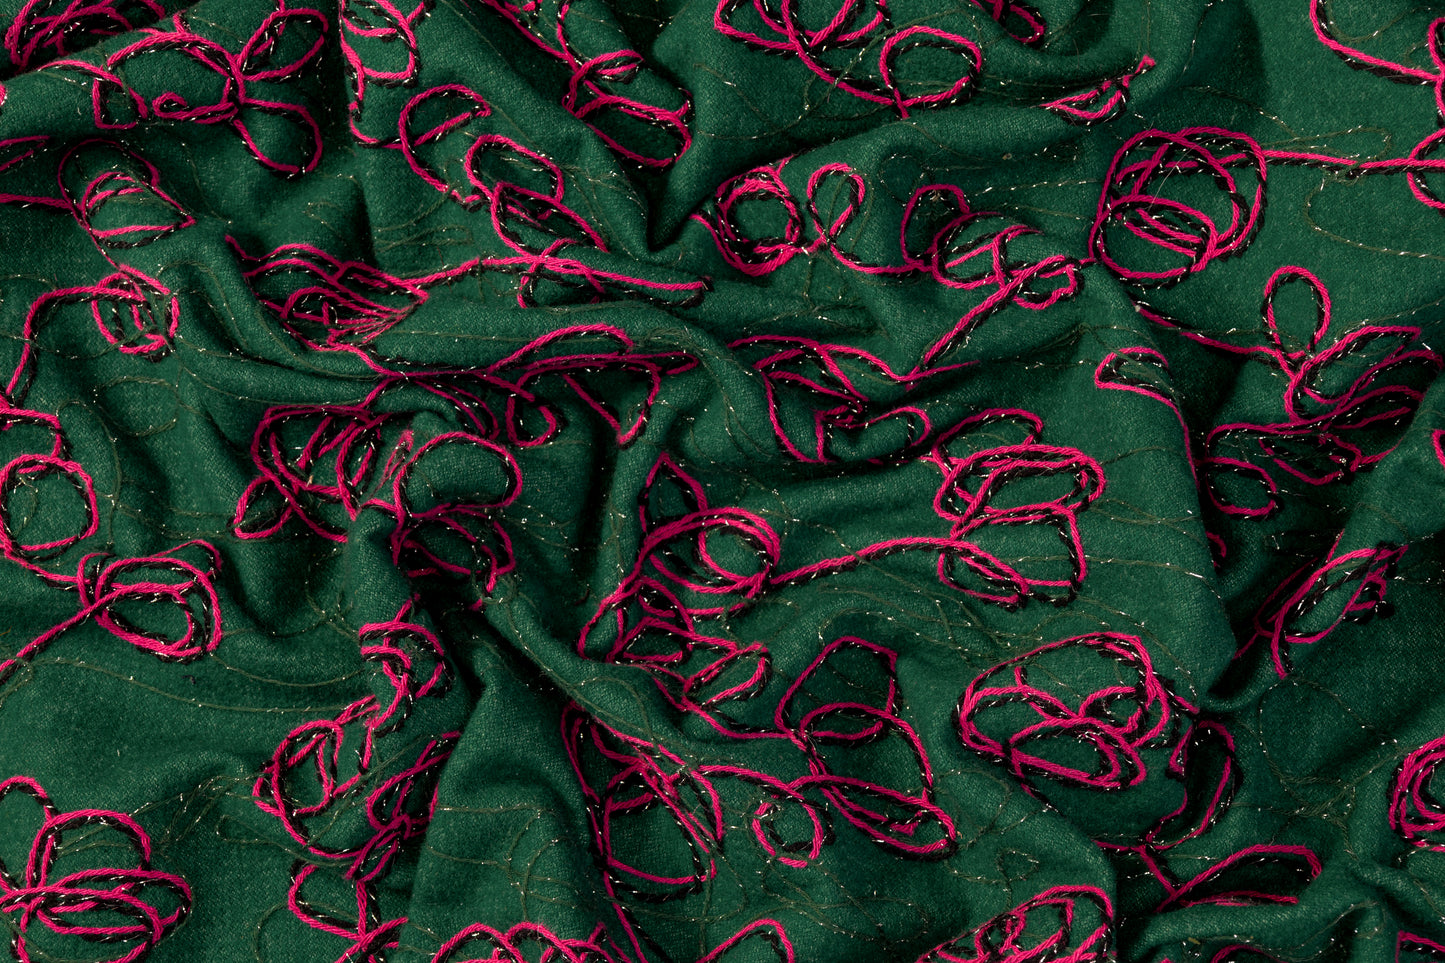 Embroidered Wool Blend Coating - Green / Fuchsia / Black / Silver